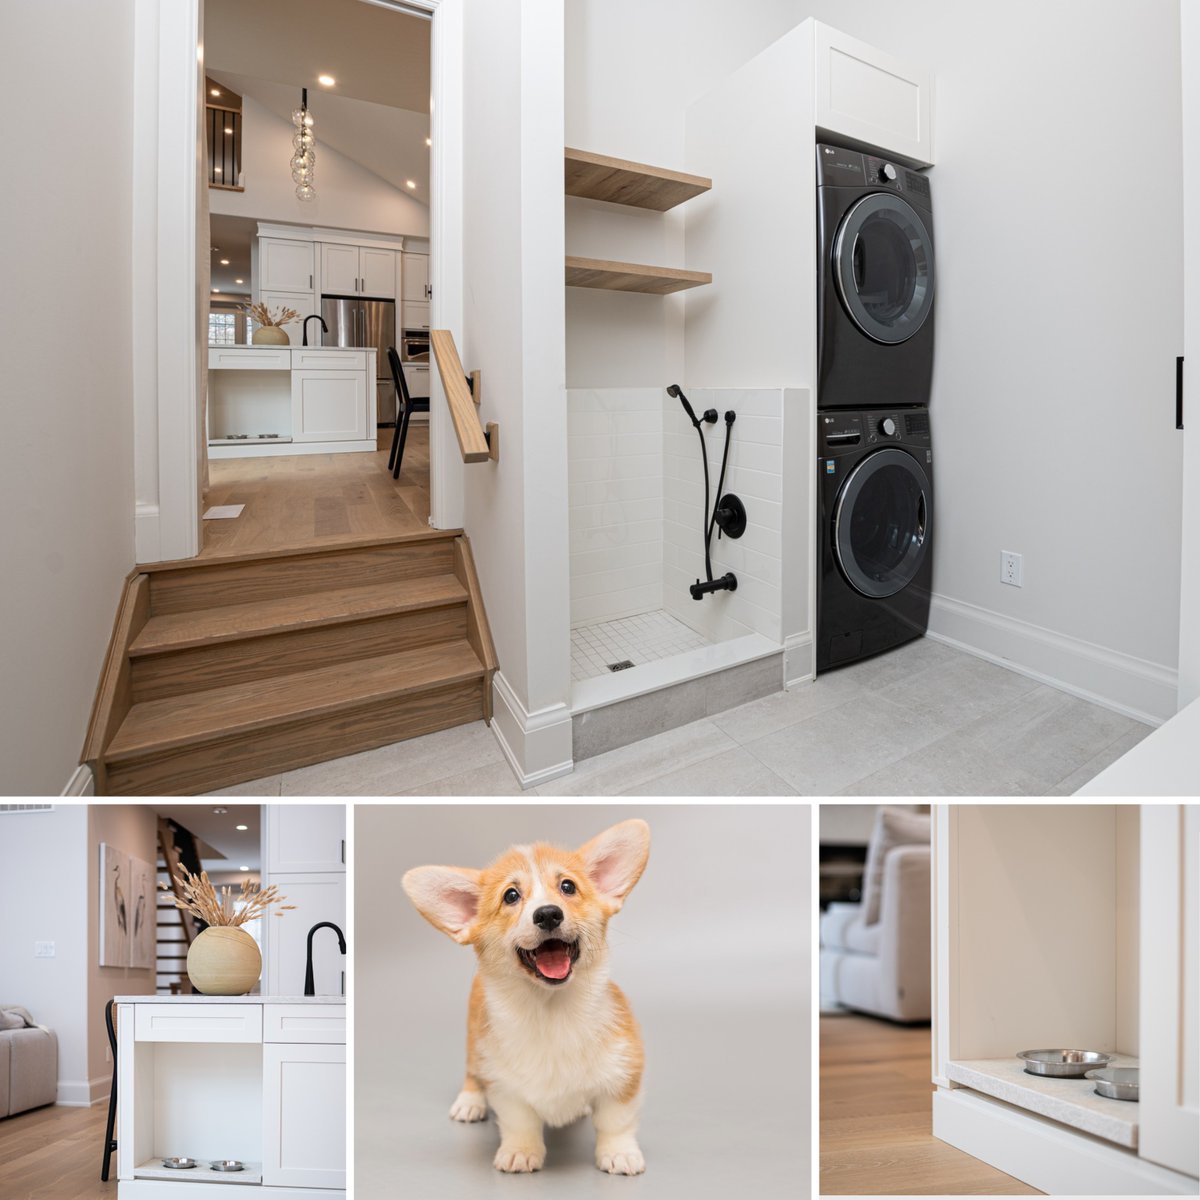 In celebration of National Pet Day, we’re showing off our popular pet-friendly options.
Everything you need for the whole family.
Including your pets. 🐾

#nationalpetday #lovepets #qualityliveshere #masonhomes